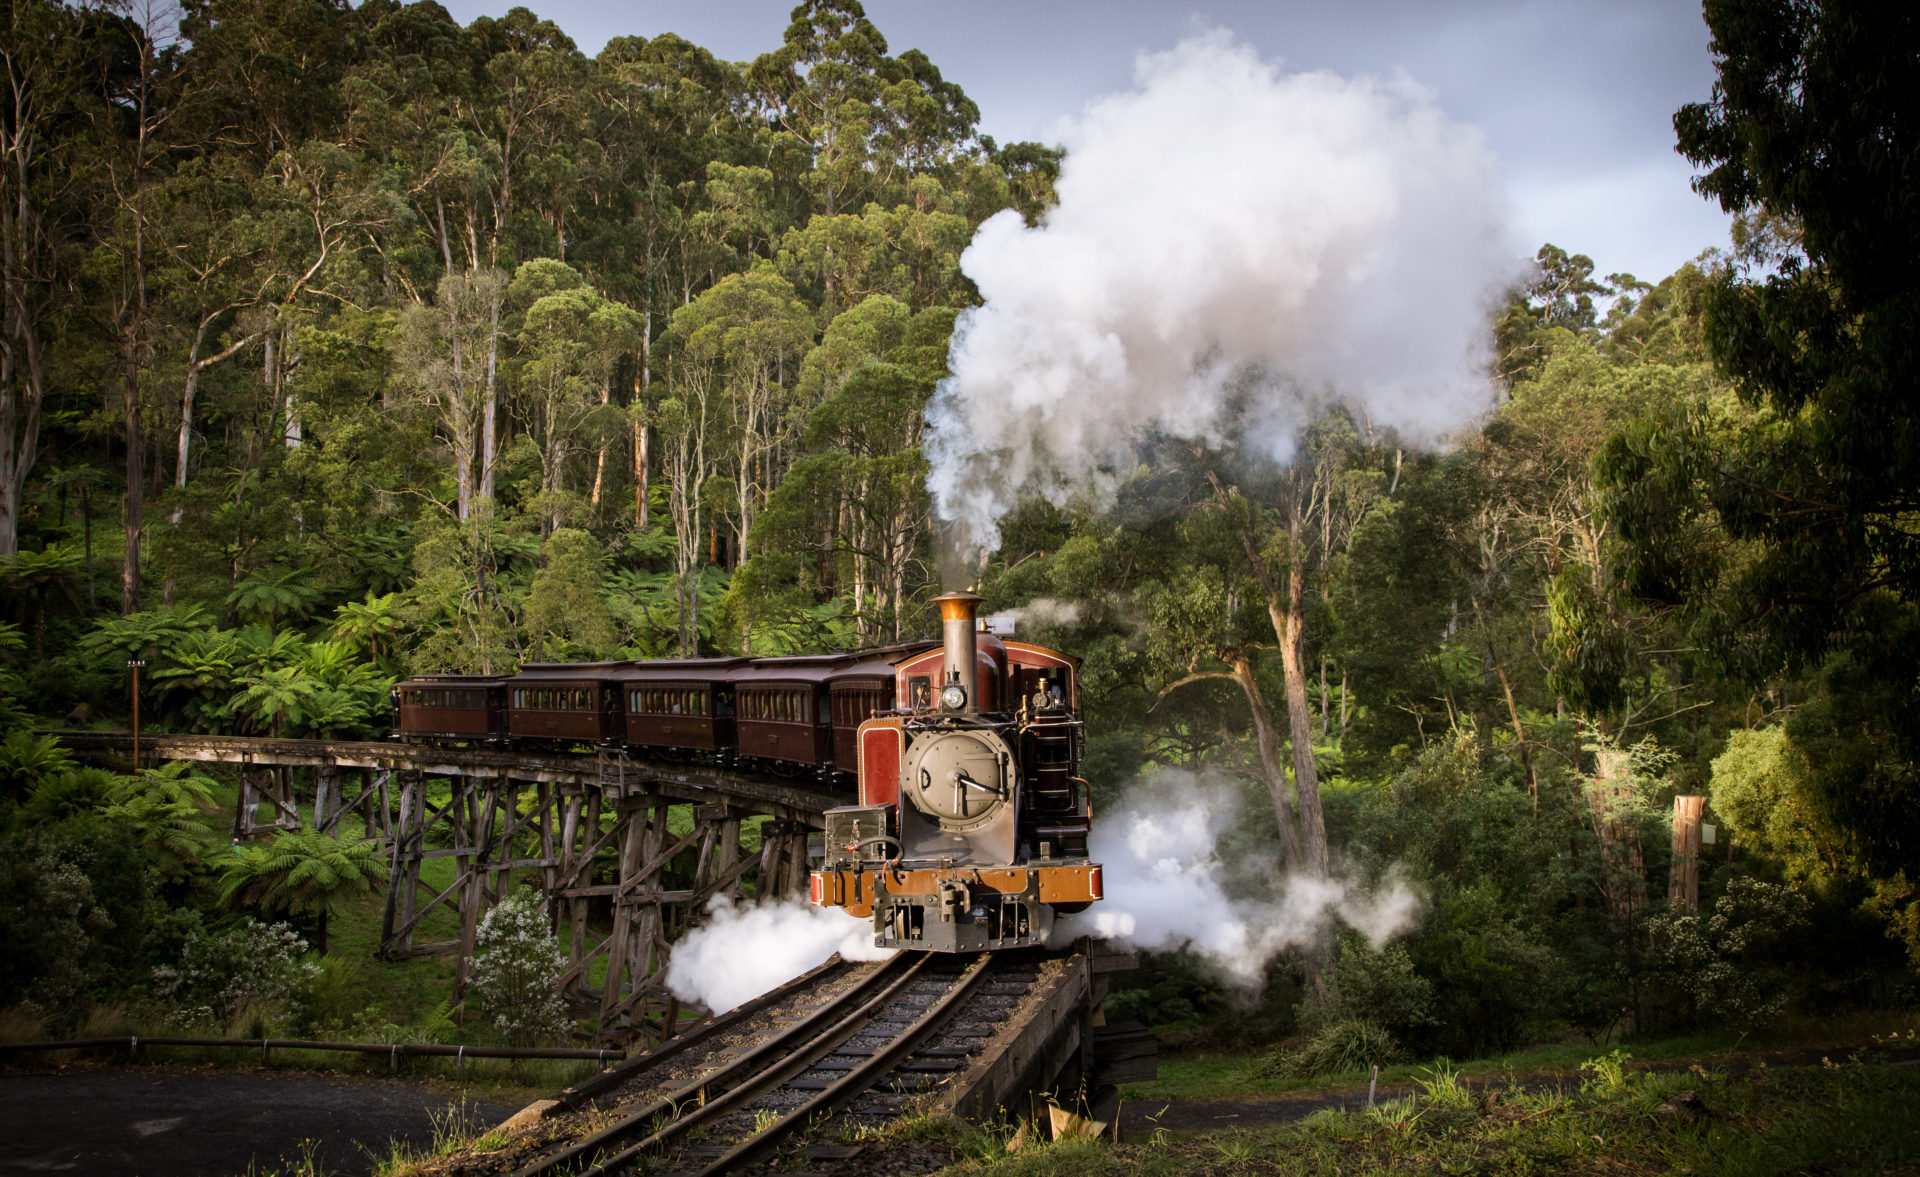 Weddings at Puffing Billy Railway - Puffing Billy.